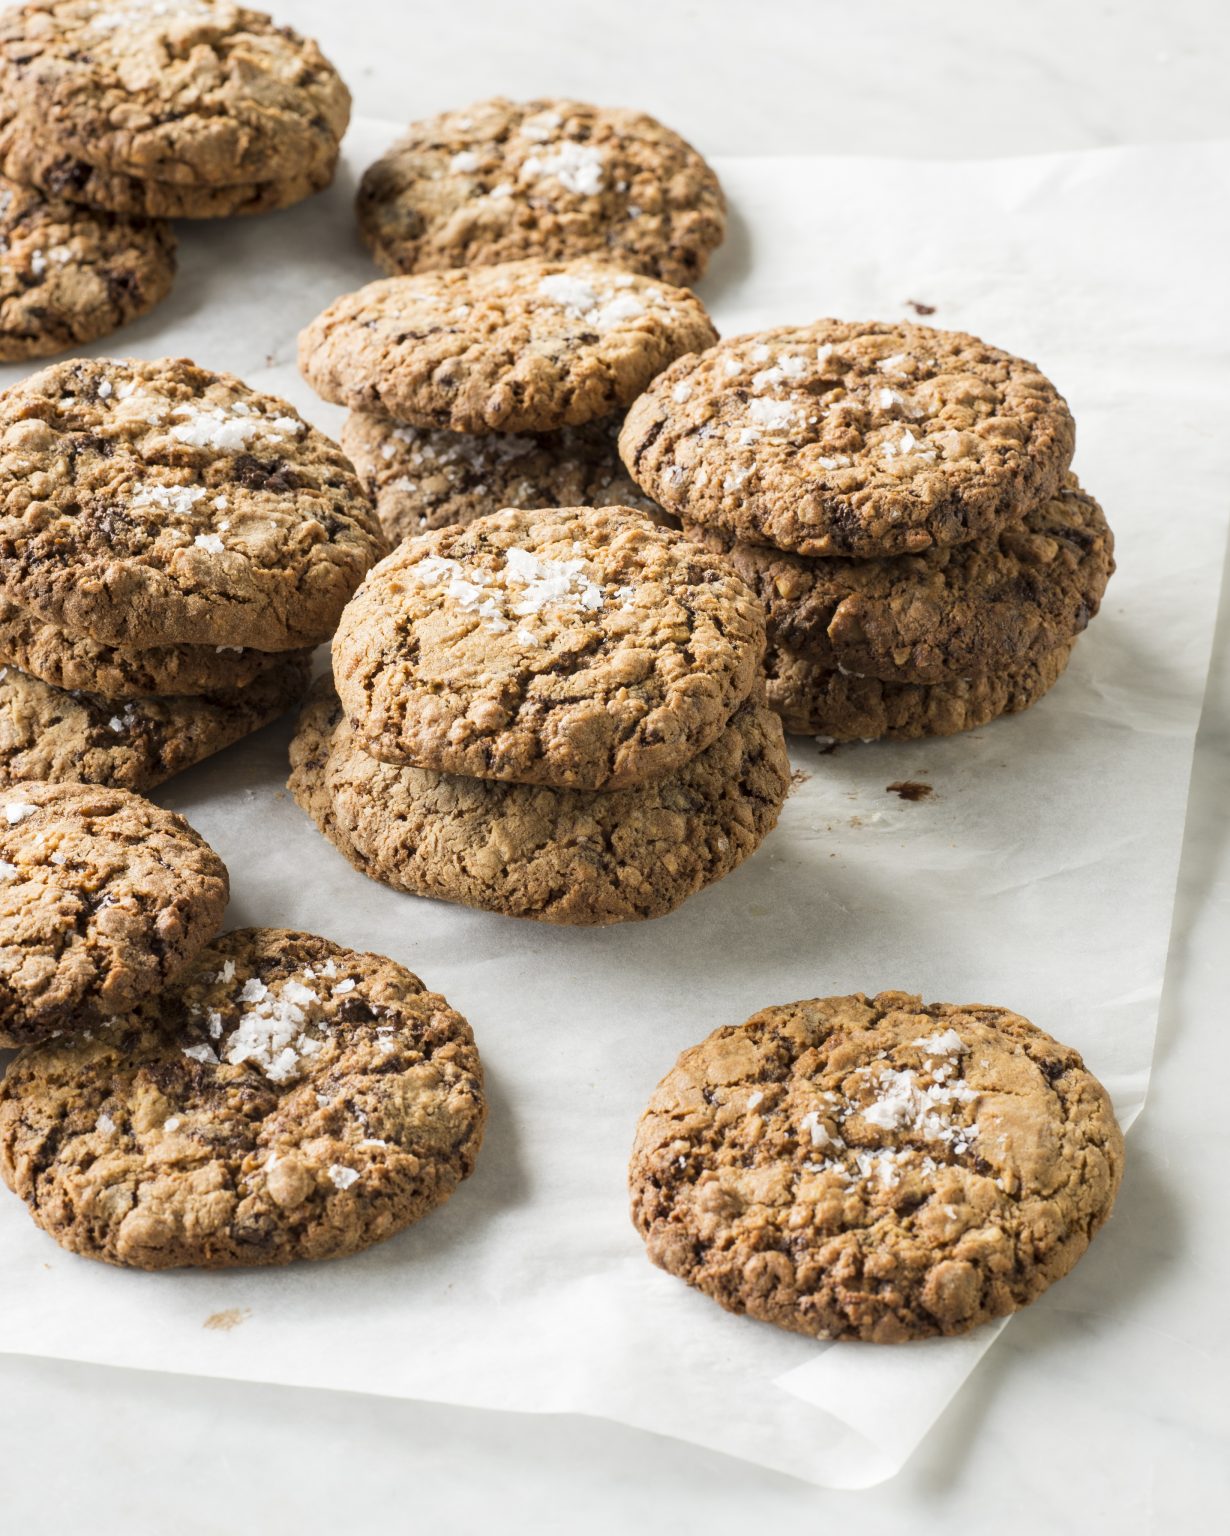 Bag of 6 peanut and chocolate malt cookies, a delightful blend of nutty and chocolaty flavors